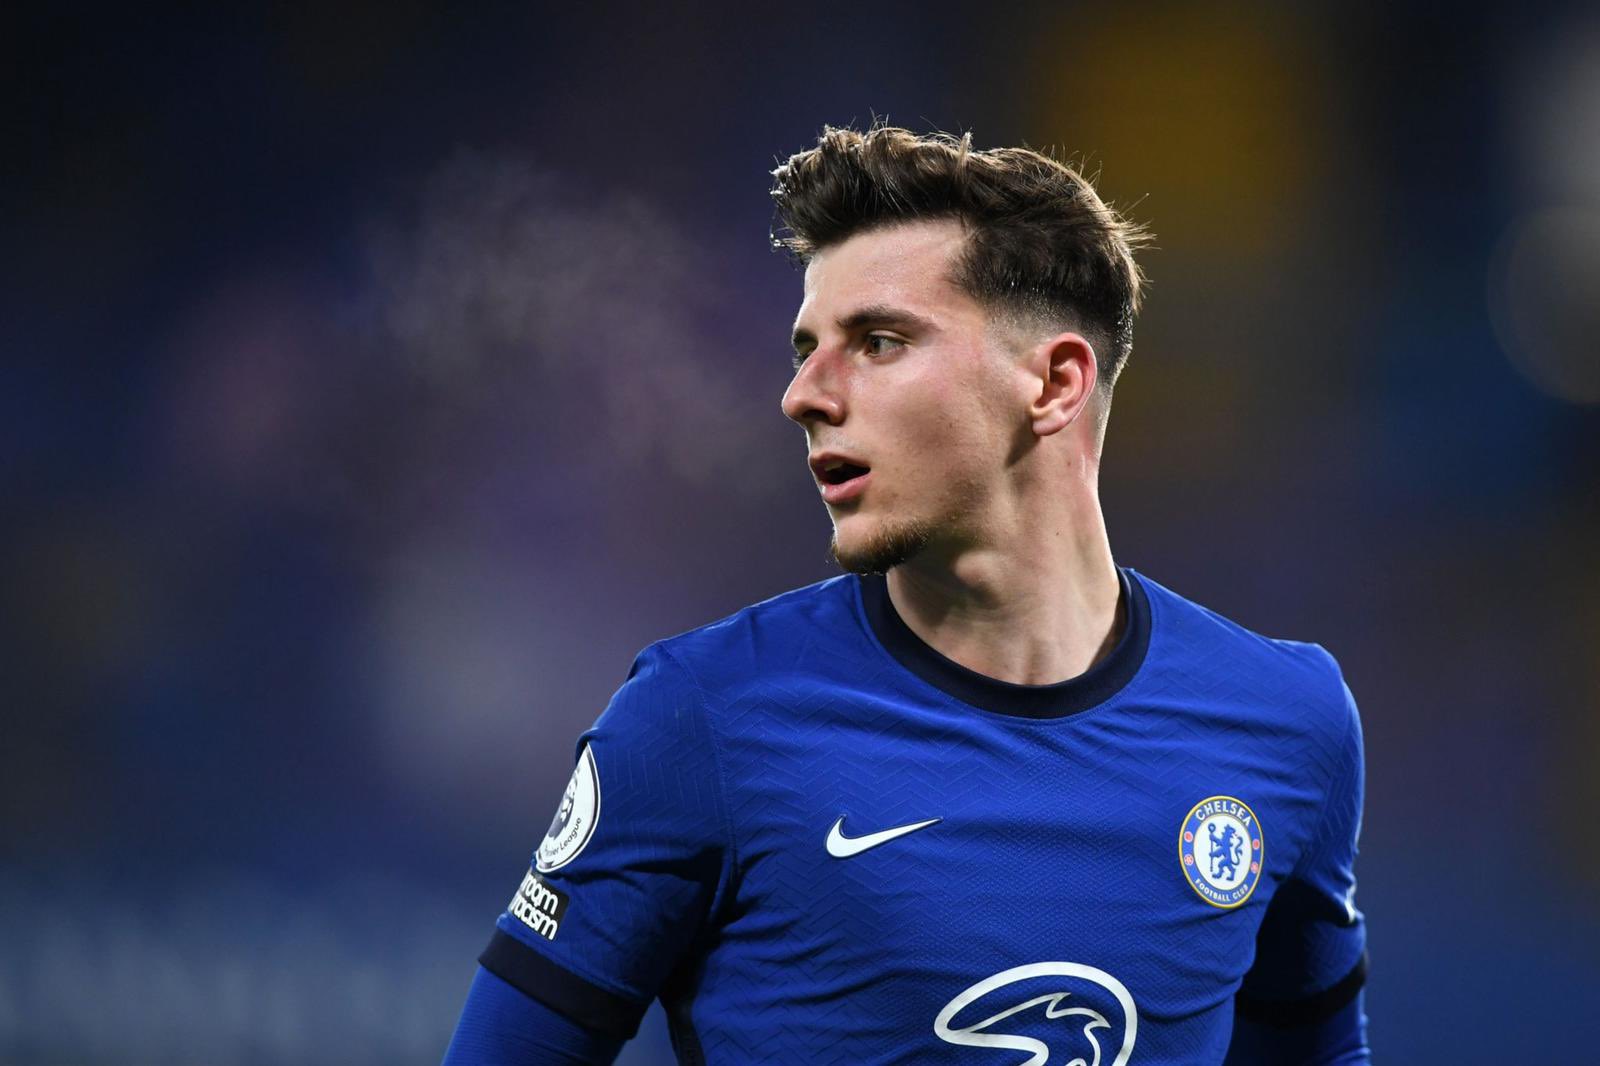 Its time to win the final at Wembley and get our payback, claims Mason Mount